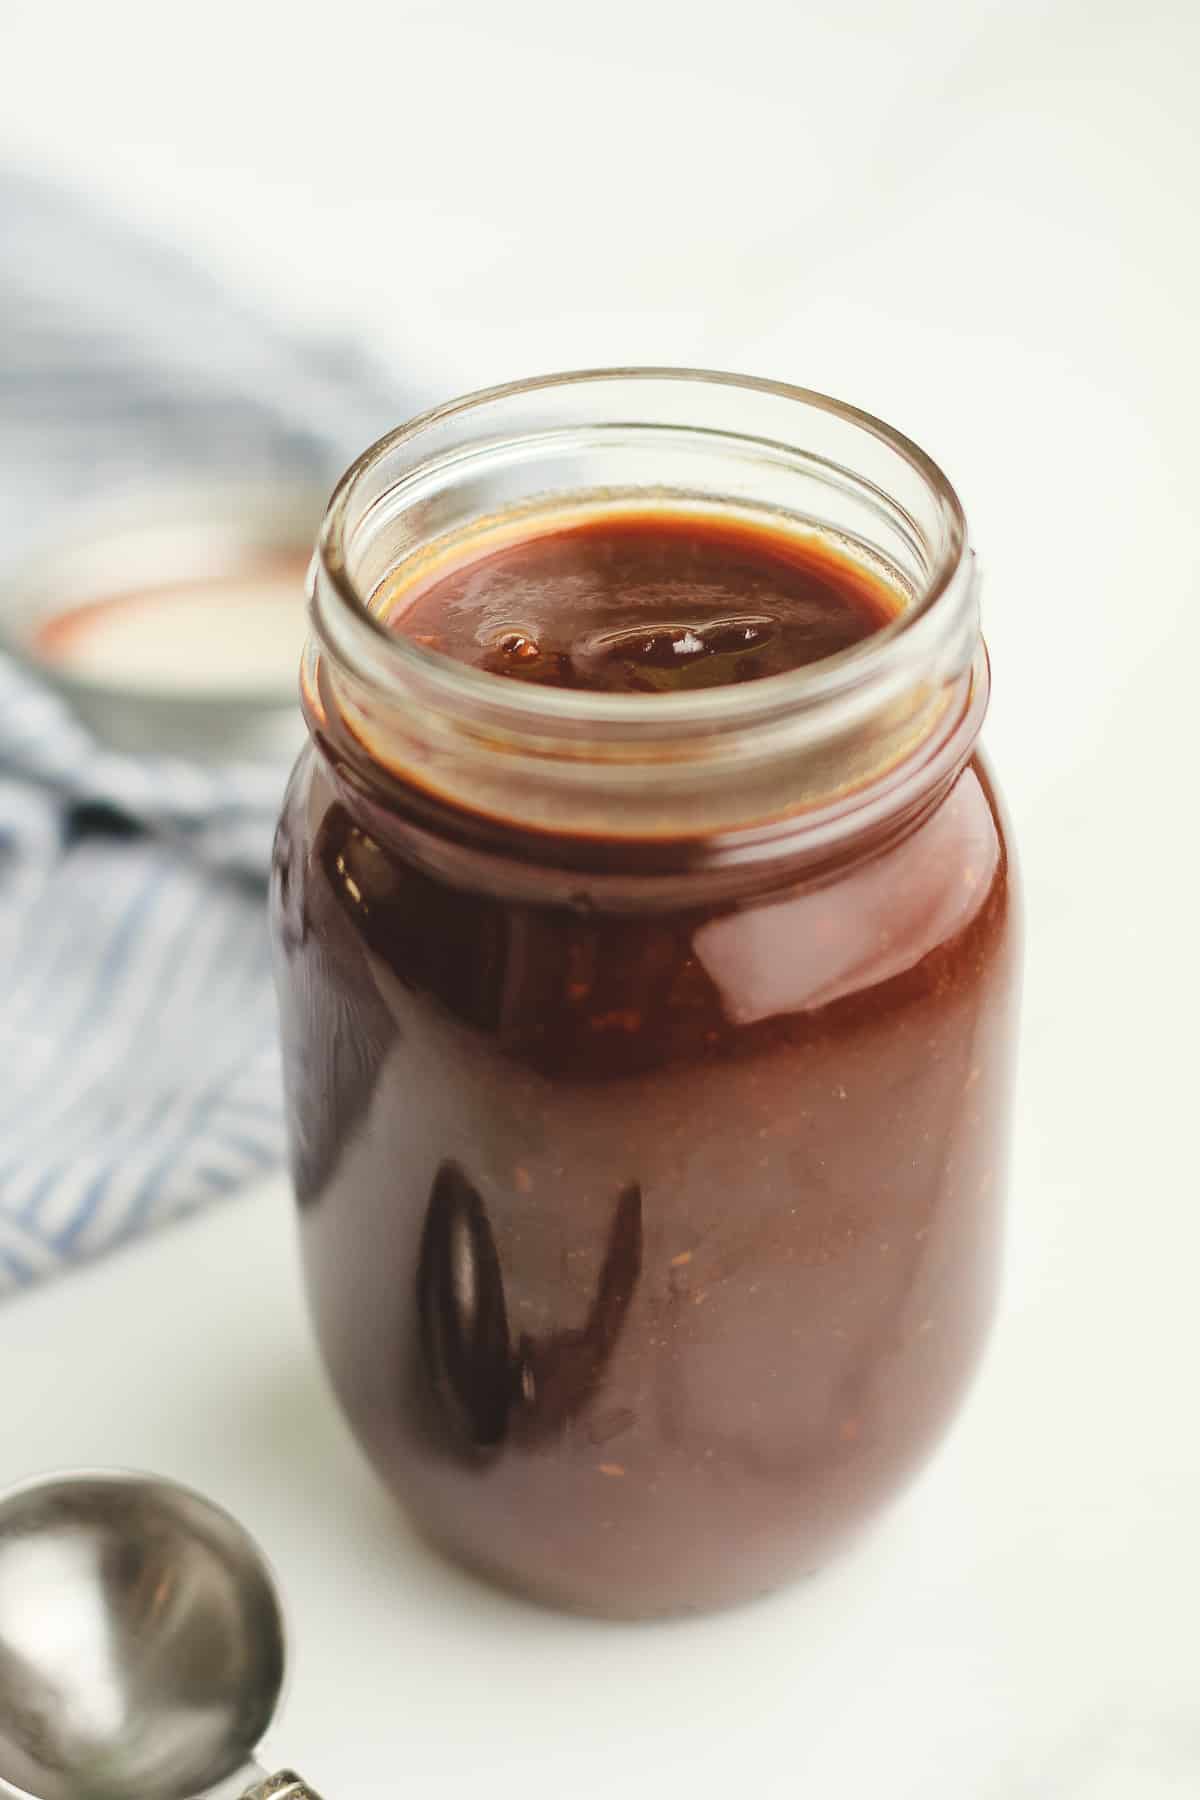 Side shot of a jar of homemade barbecue sauce.